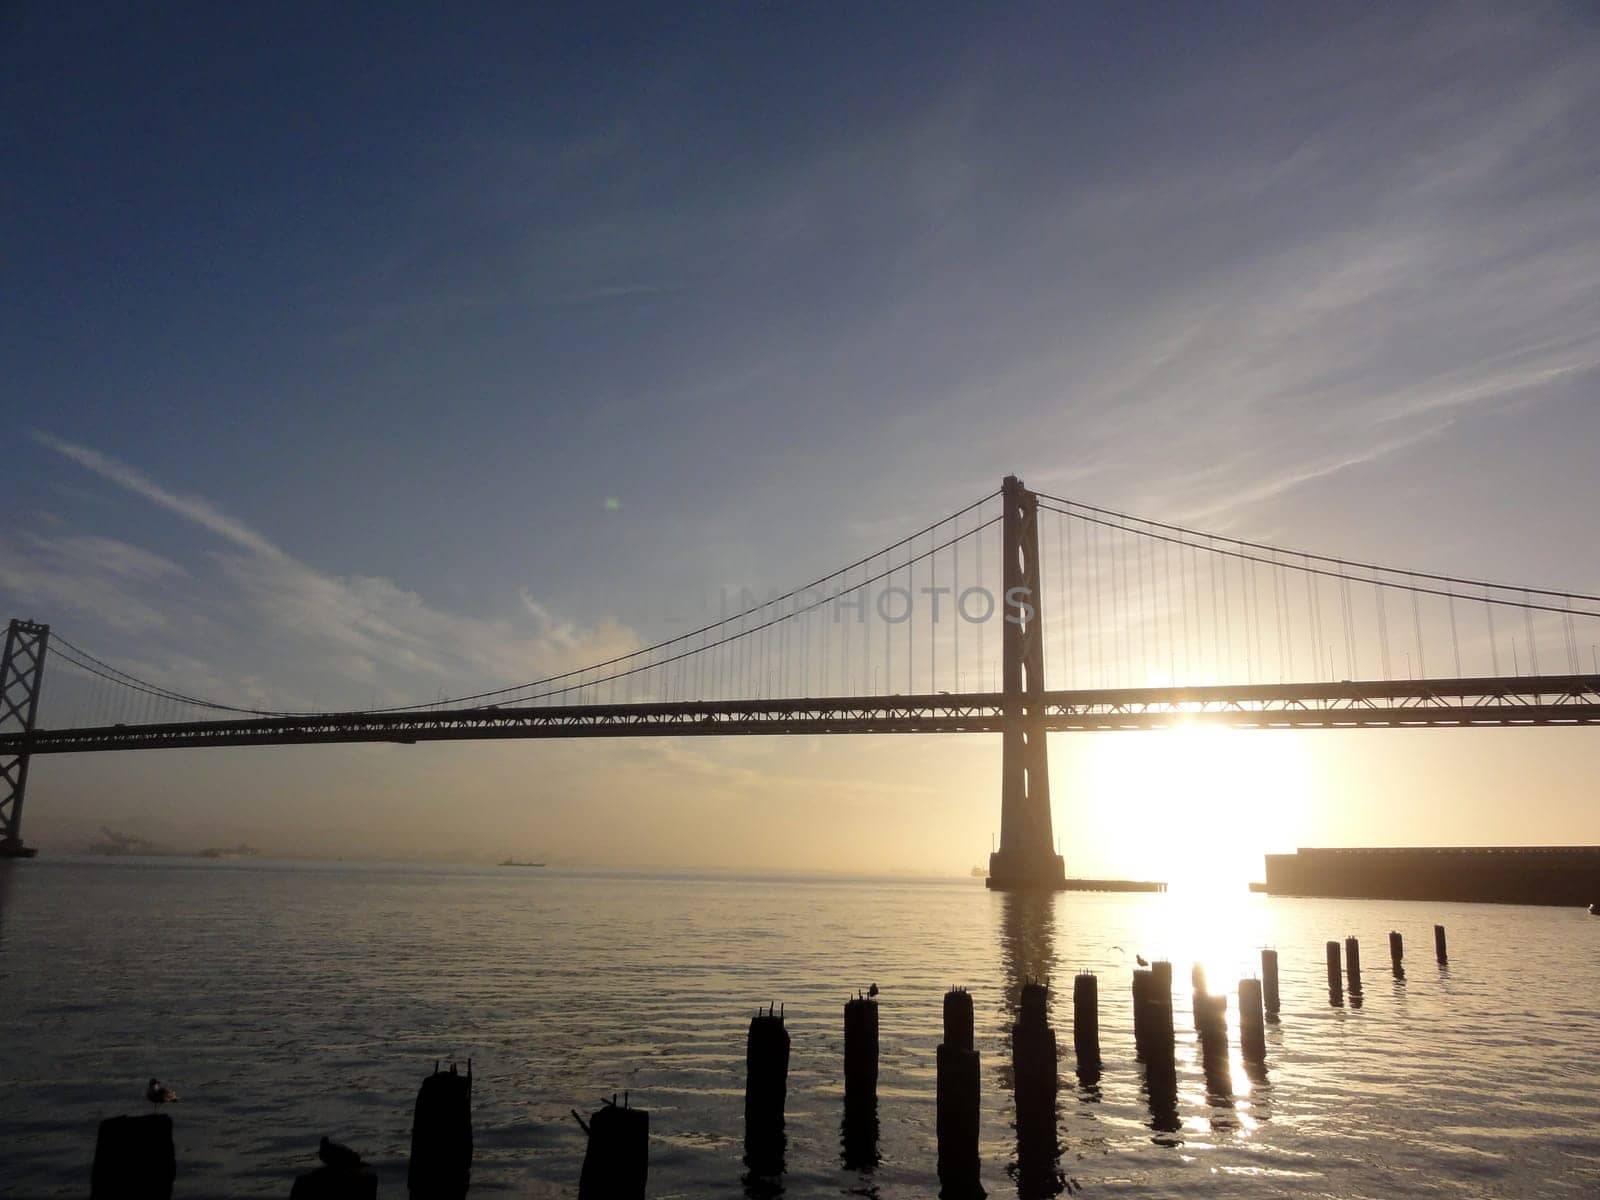 A stunning photo of a sunrise through the Bay Bridge, a suspension bridge that connects San Francisco and Oakland in California. The photo shows the bridge silhouetted against the golden orange sunrise, creating a contrast between the dark and the light. The sunrise is shining through the bridge, creating a geometric pattern of light and shadow. The sky is a light blue color with some clouds. The water is a dark blue color and is calm. There are some wooden pilings in the foreground, adding a touch of rustic charm to the scene. The photo captures the beauty and the elegance of the Bay Bridge